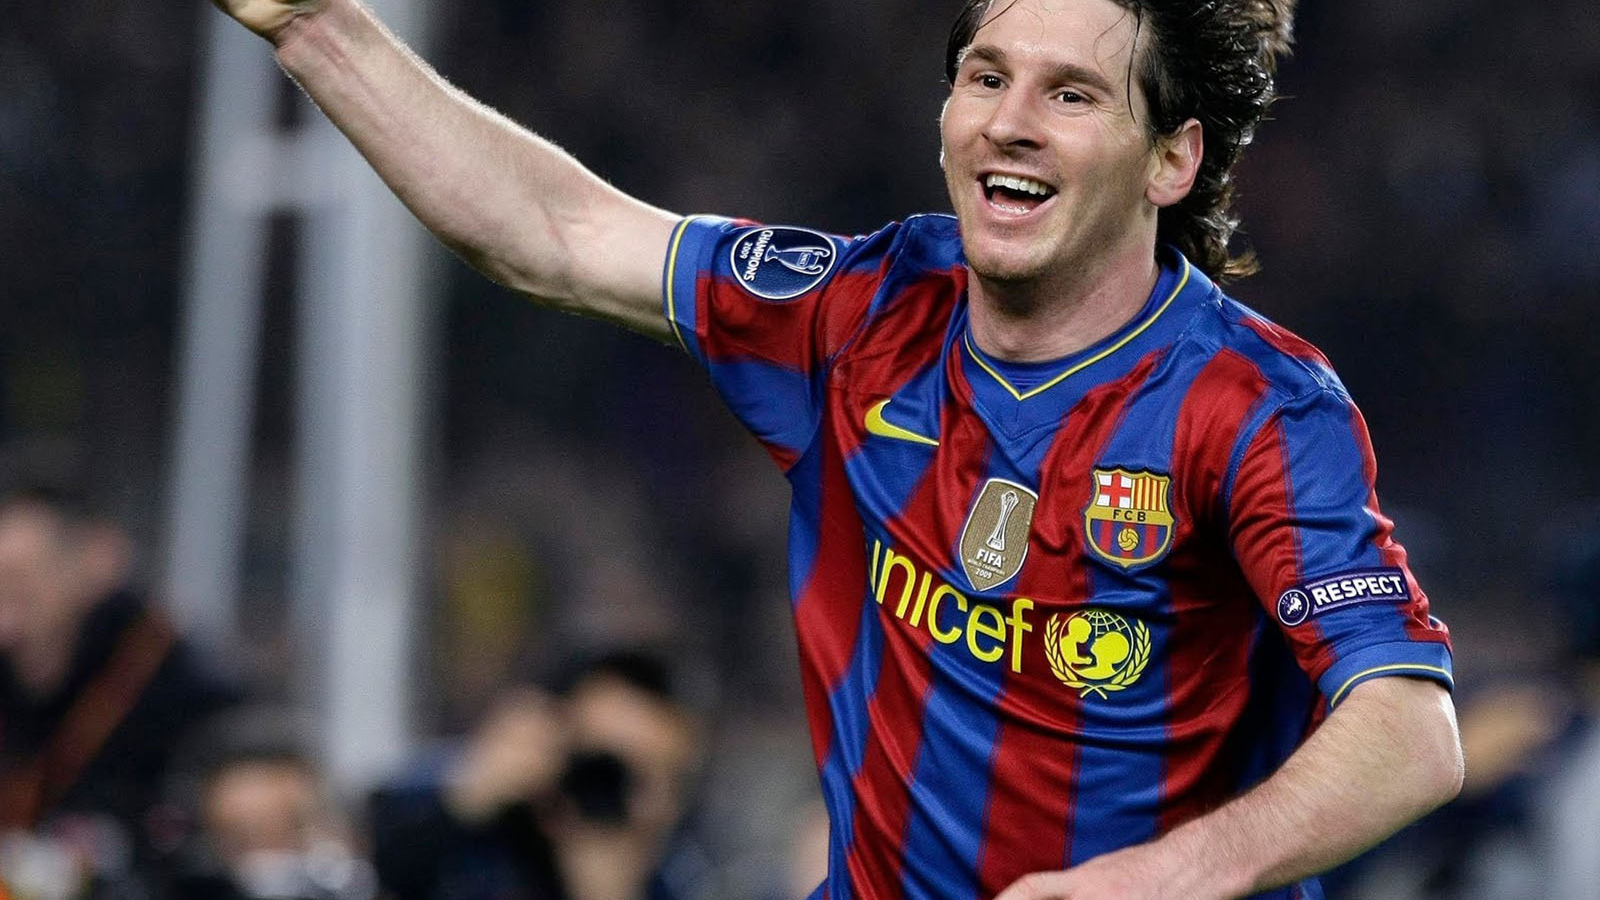 The player of Barcelona Lionel Messi after goal ball